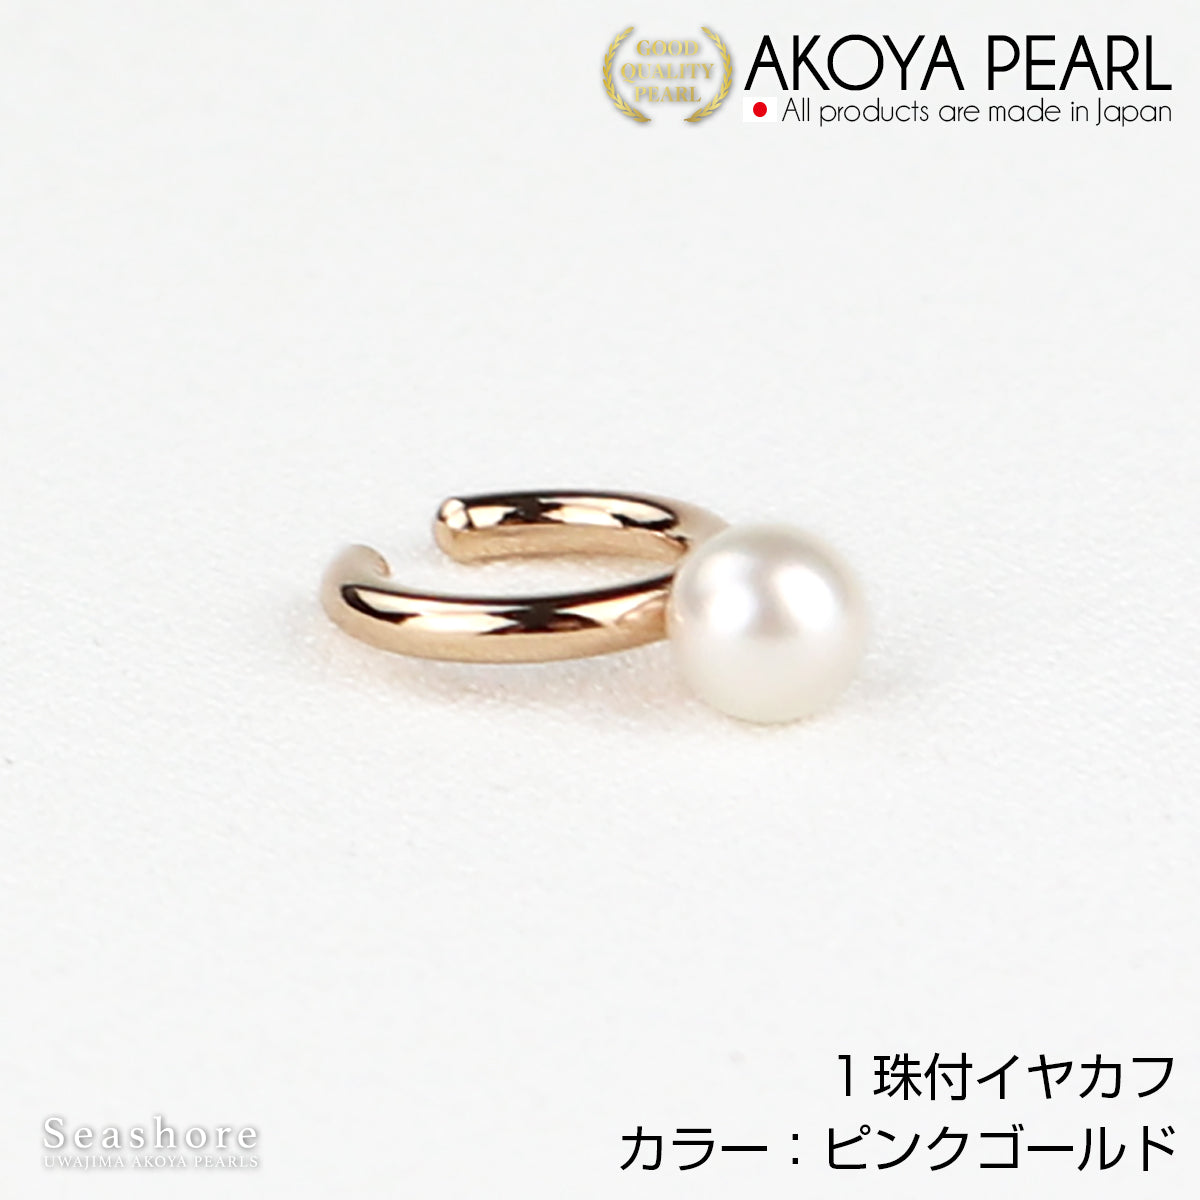 1 Akoya Pearl Pearl Ear Cuff for One Ear [5.5-6.0mm] [3 Colors] Brass Rhodium/Pink Gold/Gold